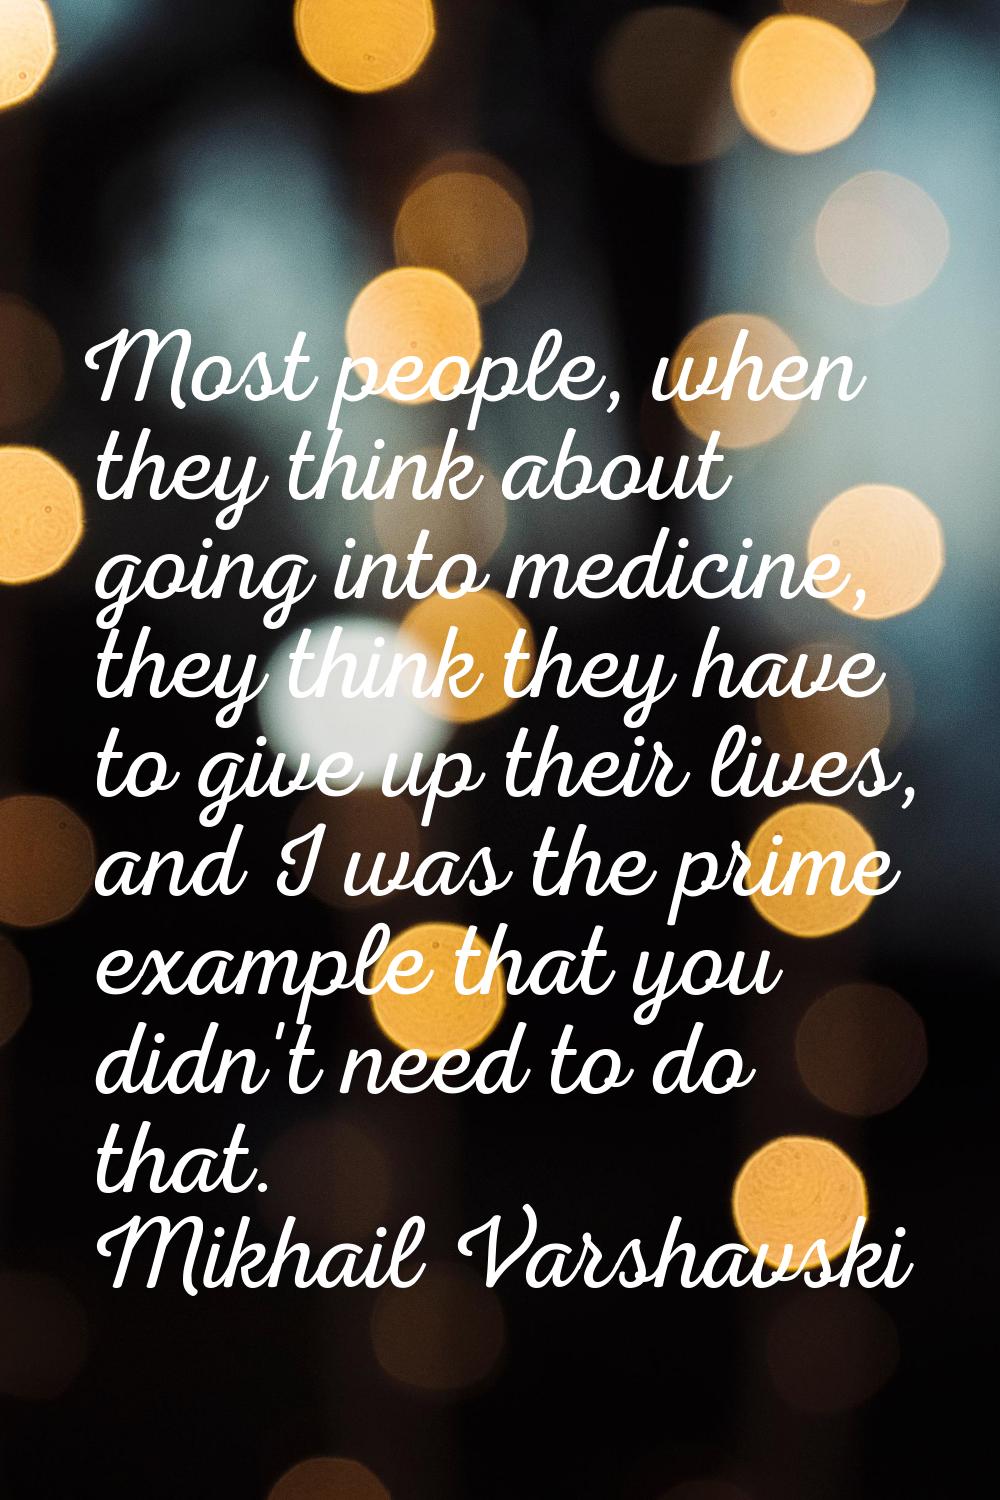 Most people, when they think about going into medicine, they think they have to give up their lives